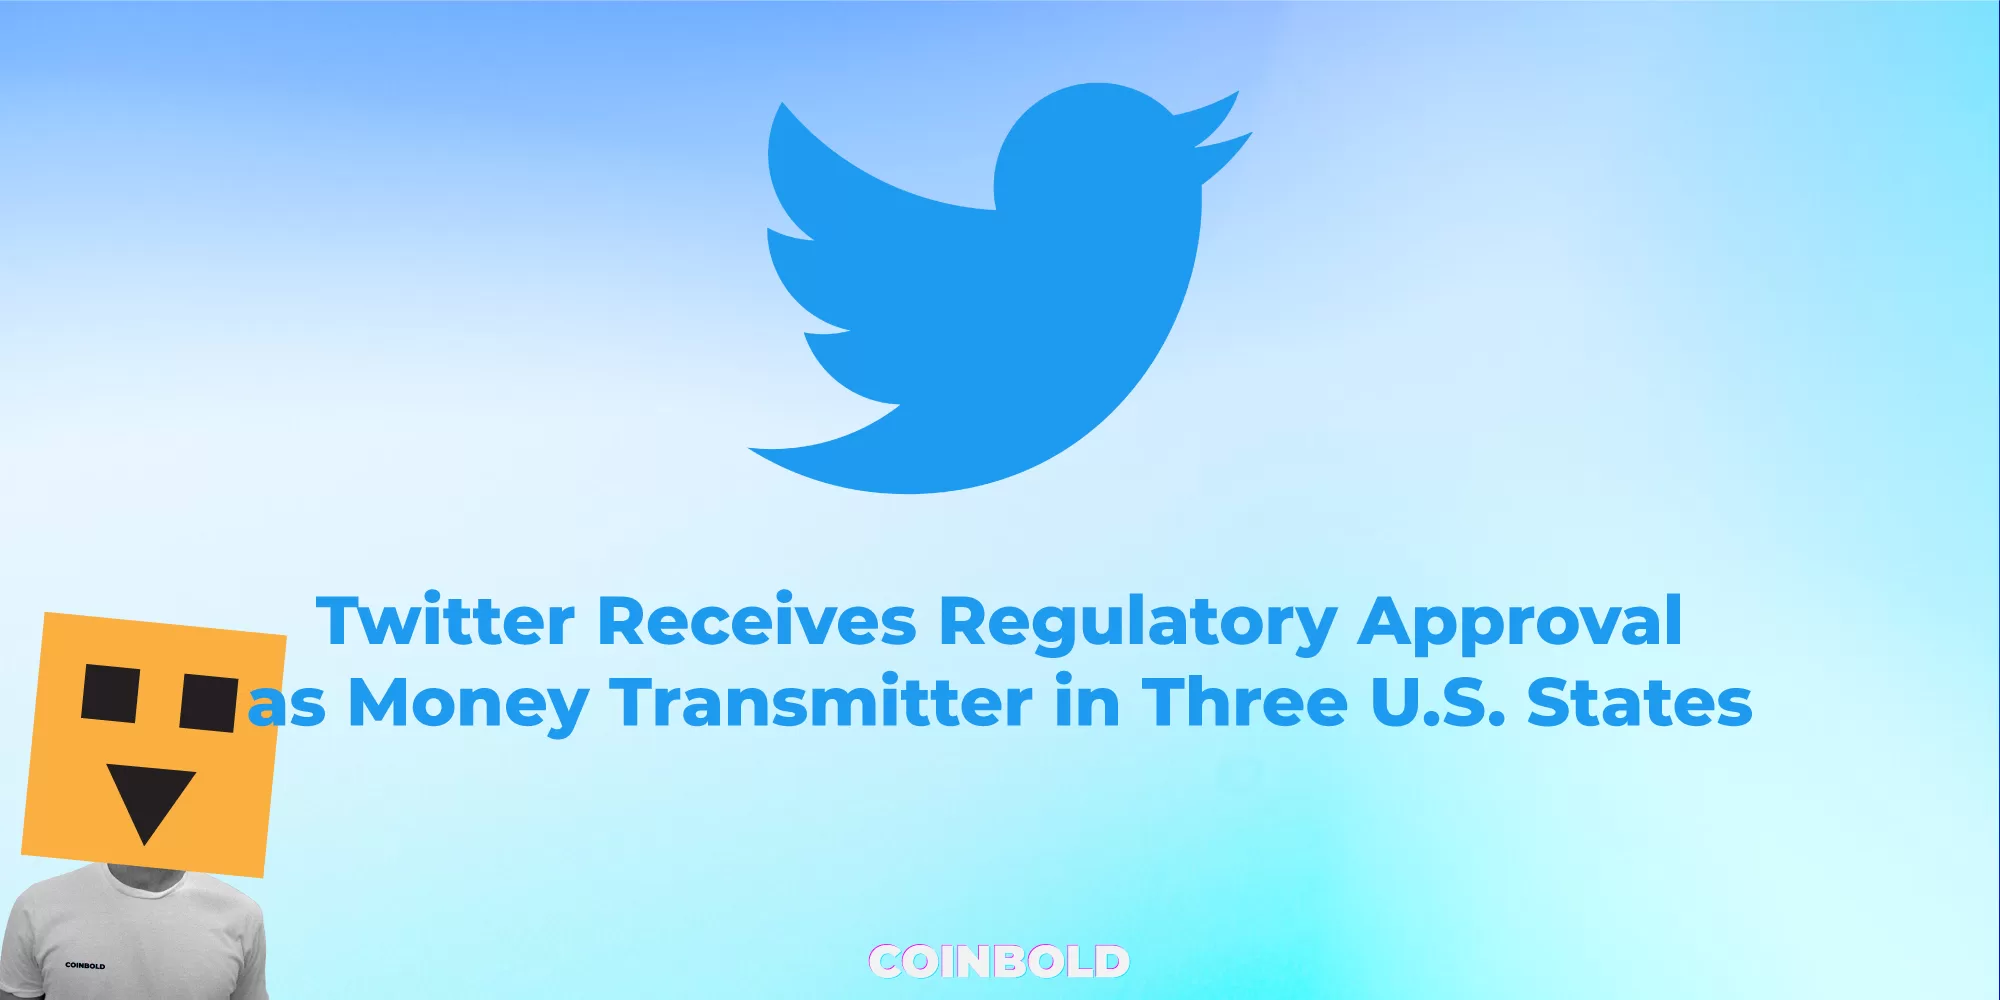 Twitter Receives Regulatory Approval as Money Transmitter in Three U.S. States